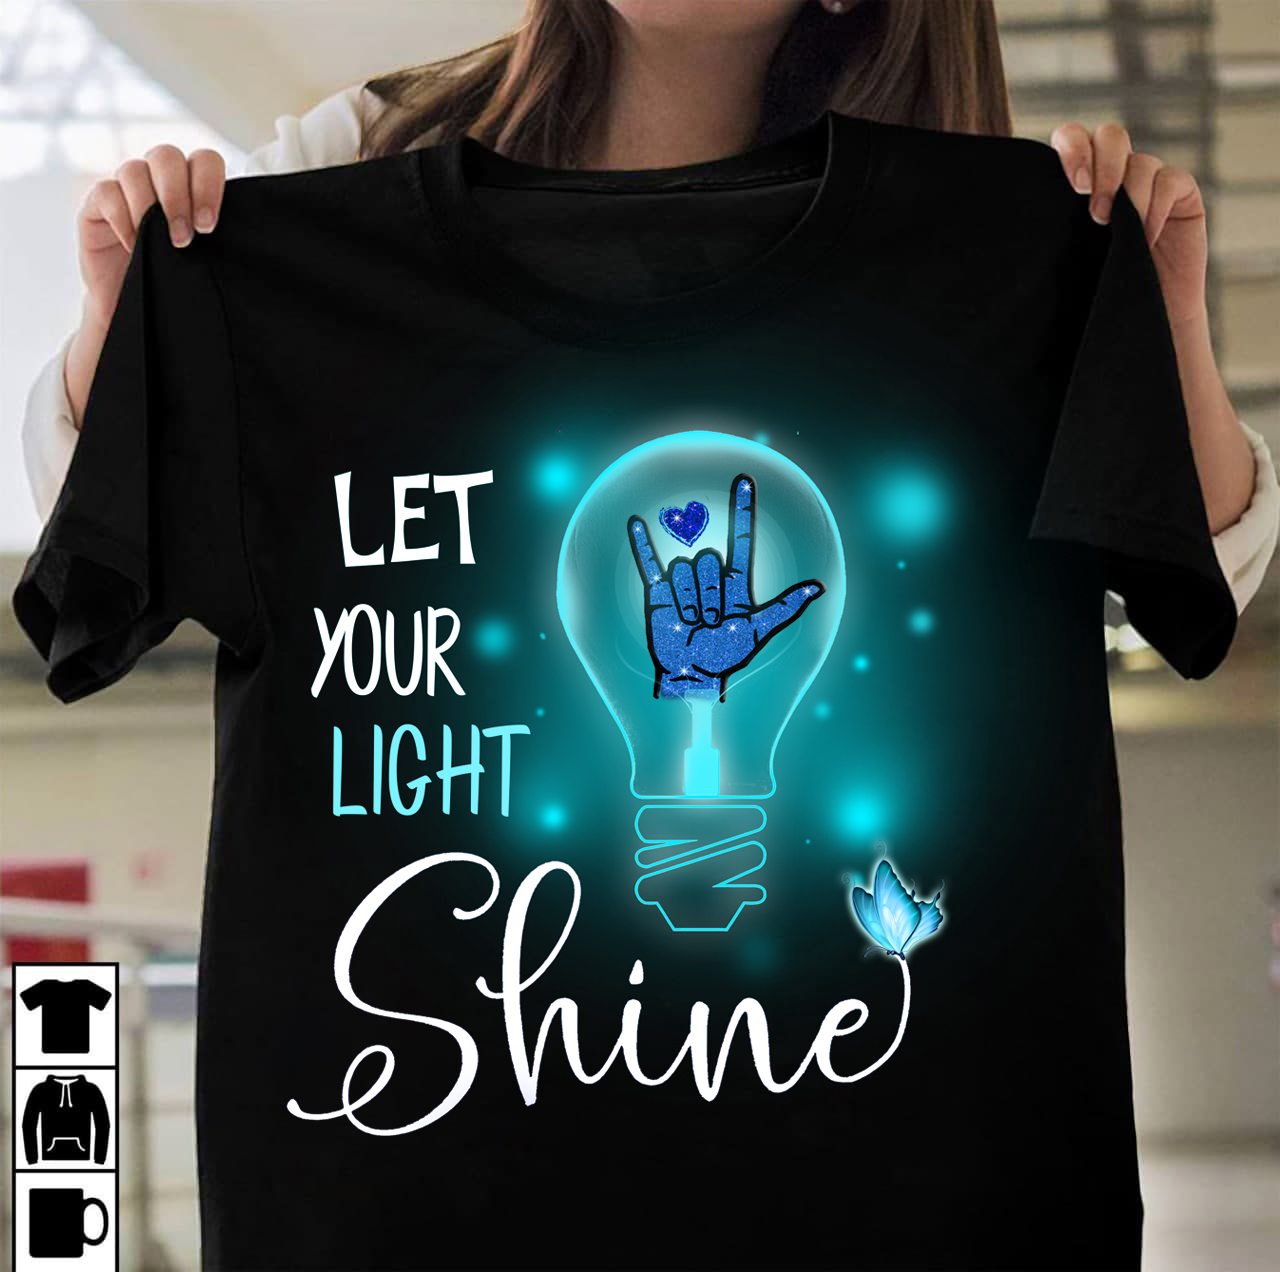 Let your light shine - Lightbub and butterfly